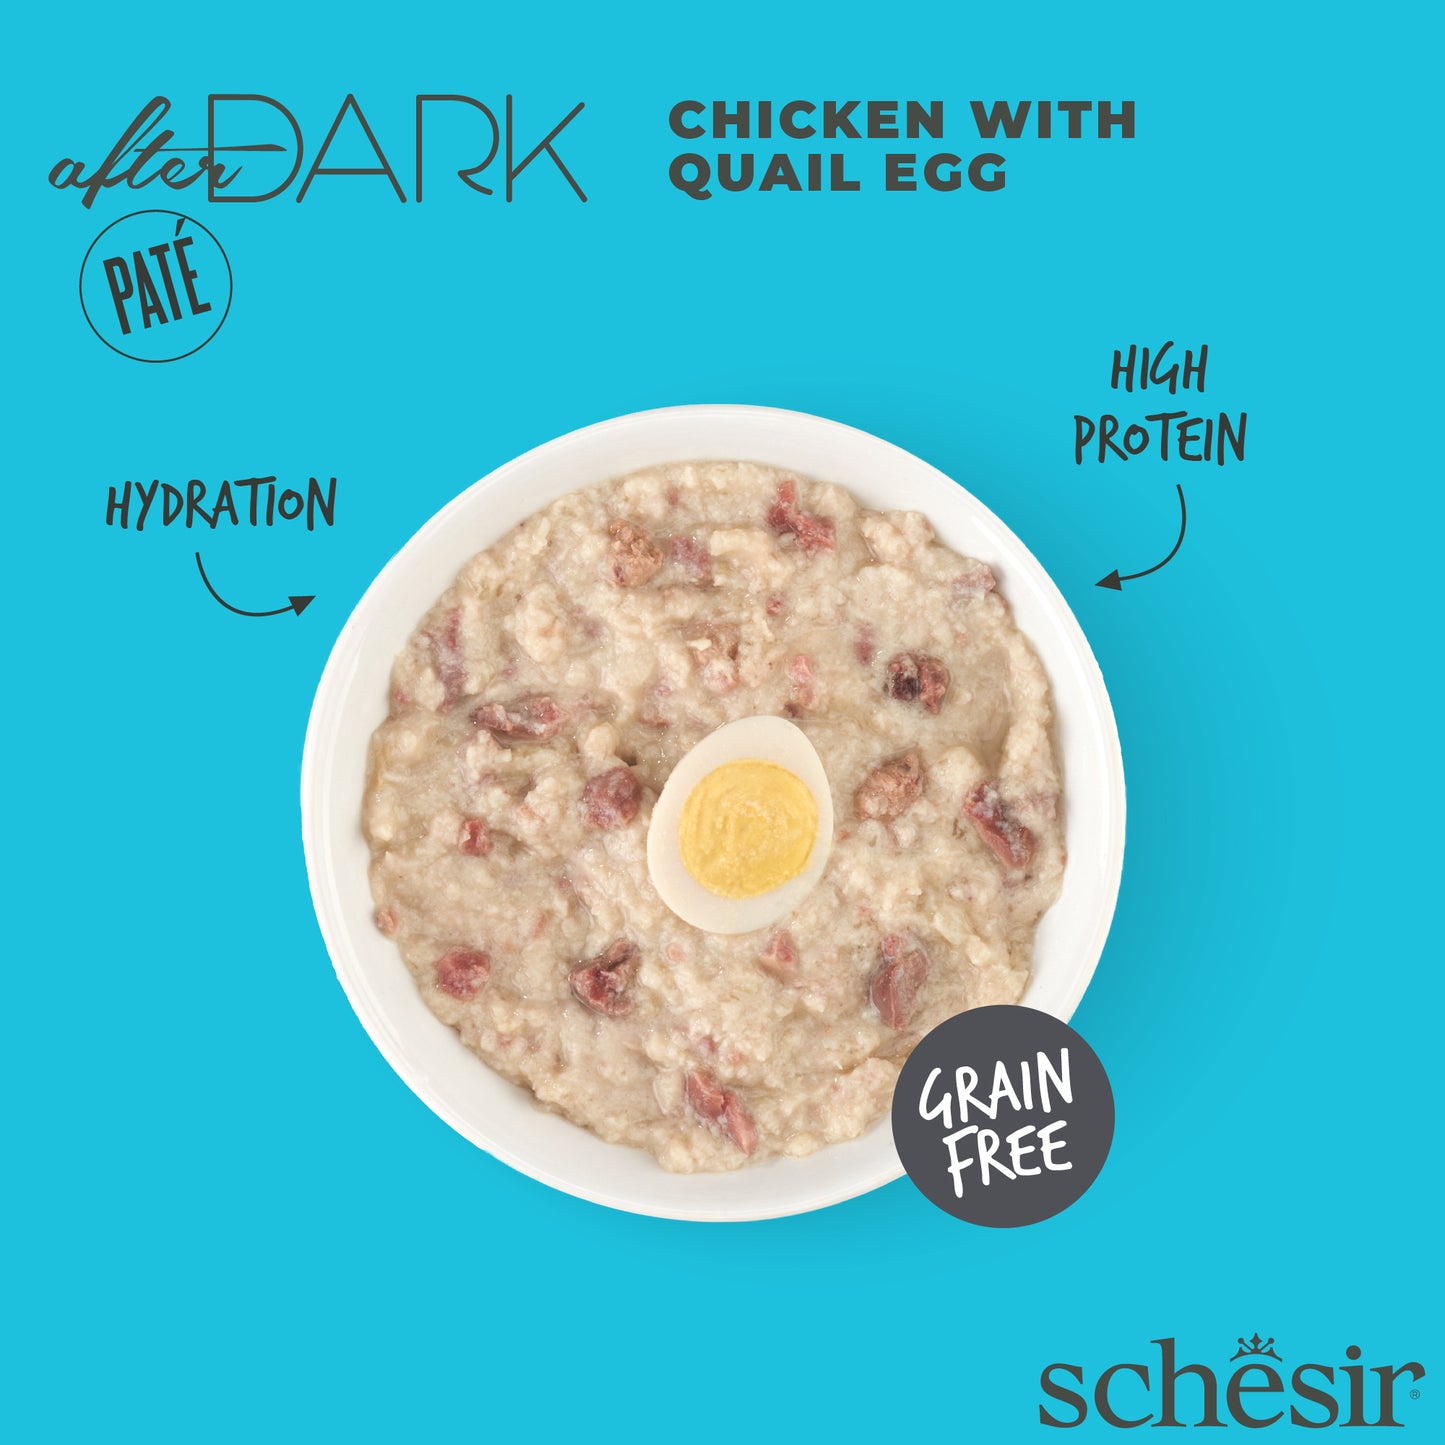 [5% OFF NNC Members] Schesir After Dark Pate - Chicken with Quail Egg, 80g